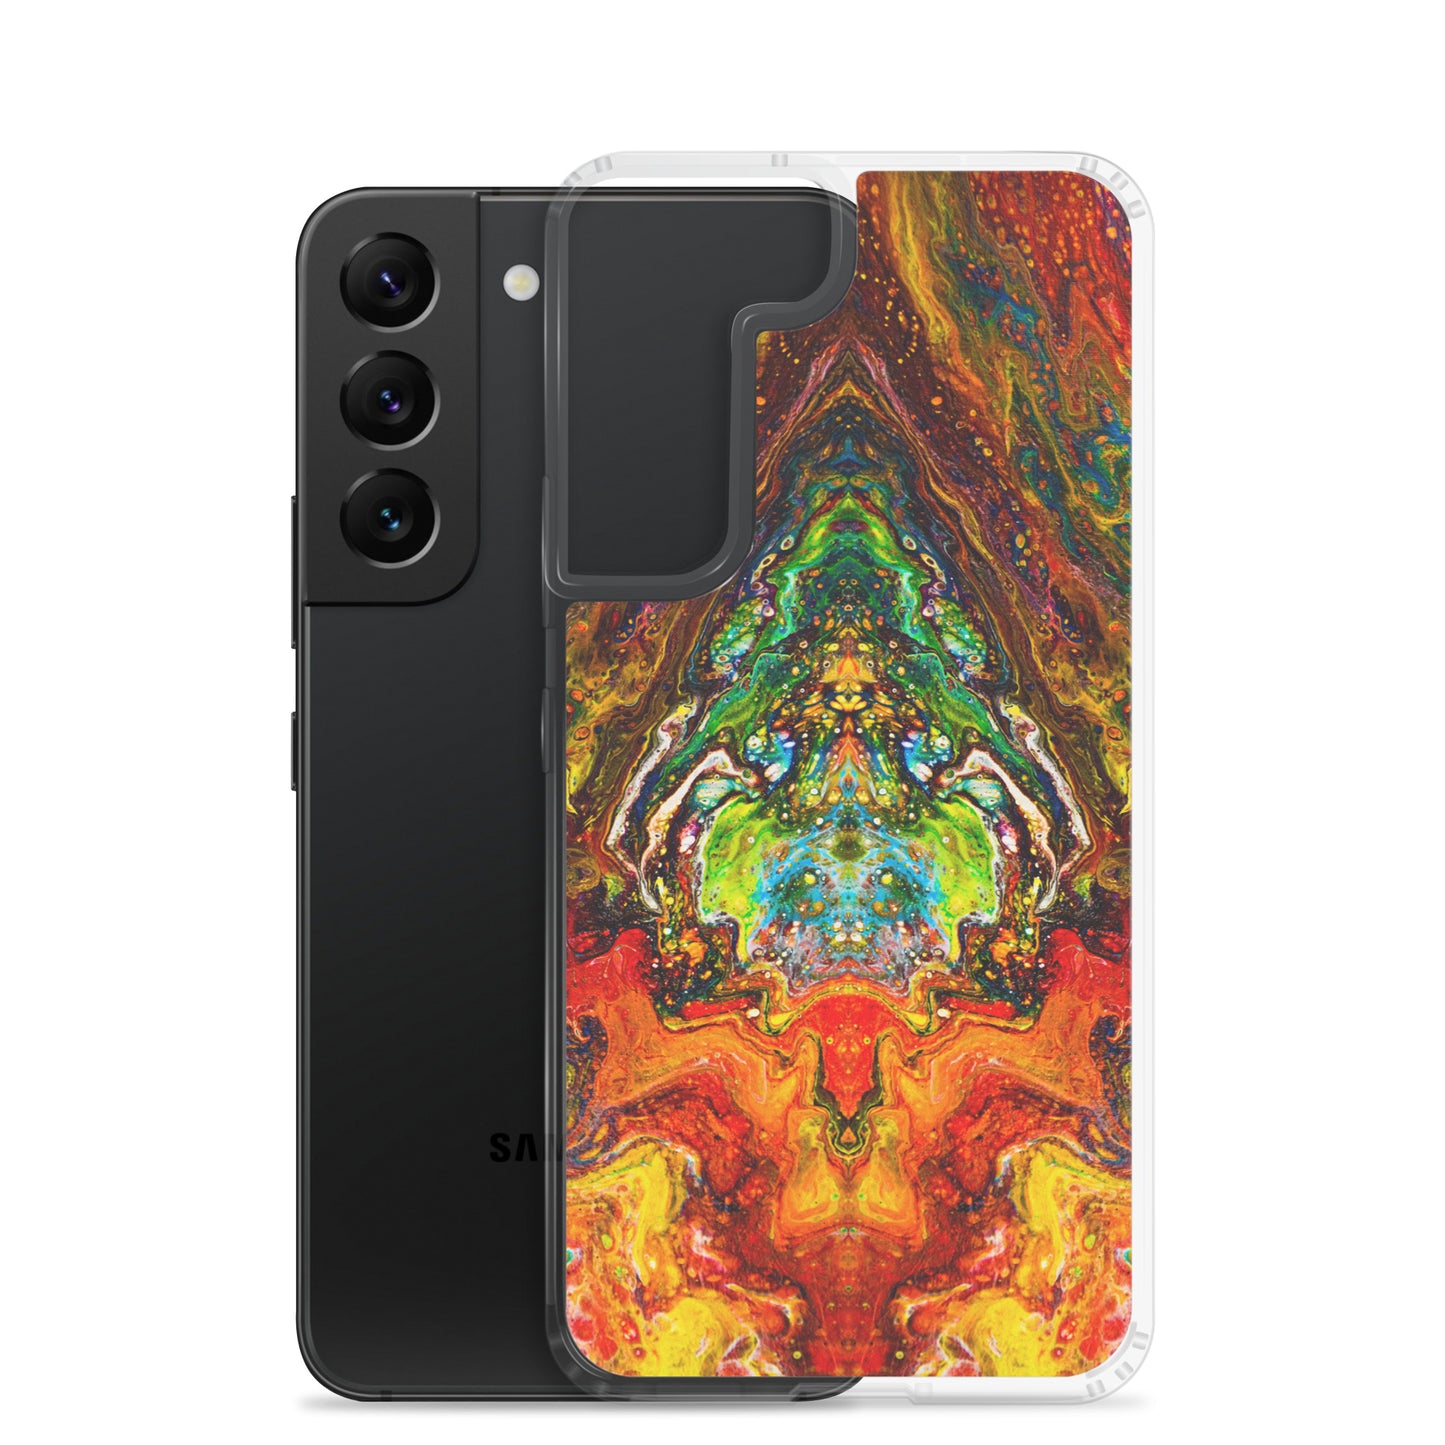 NightOwl Studio Custom Phone Case Compatible with Samsung Galaxy, Slim Cover for Wireless Charging, Drop and Scratch Resistant, Psychedelic Something